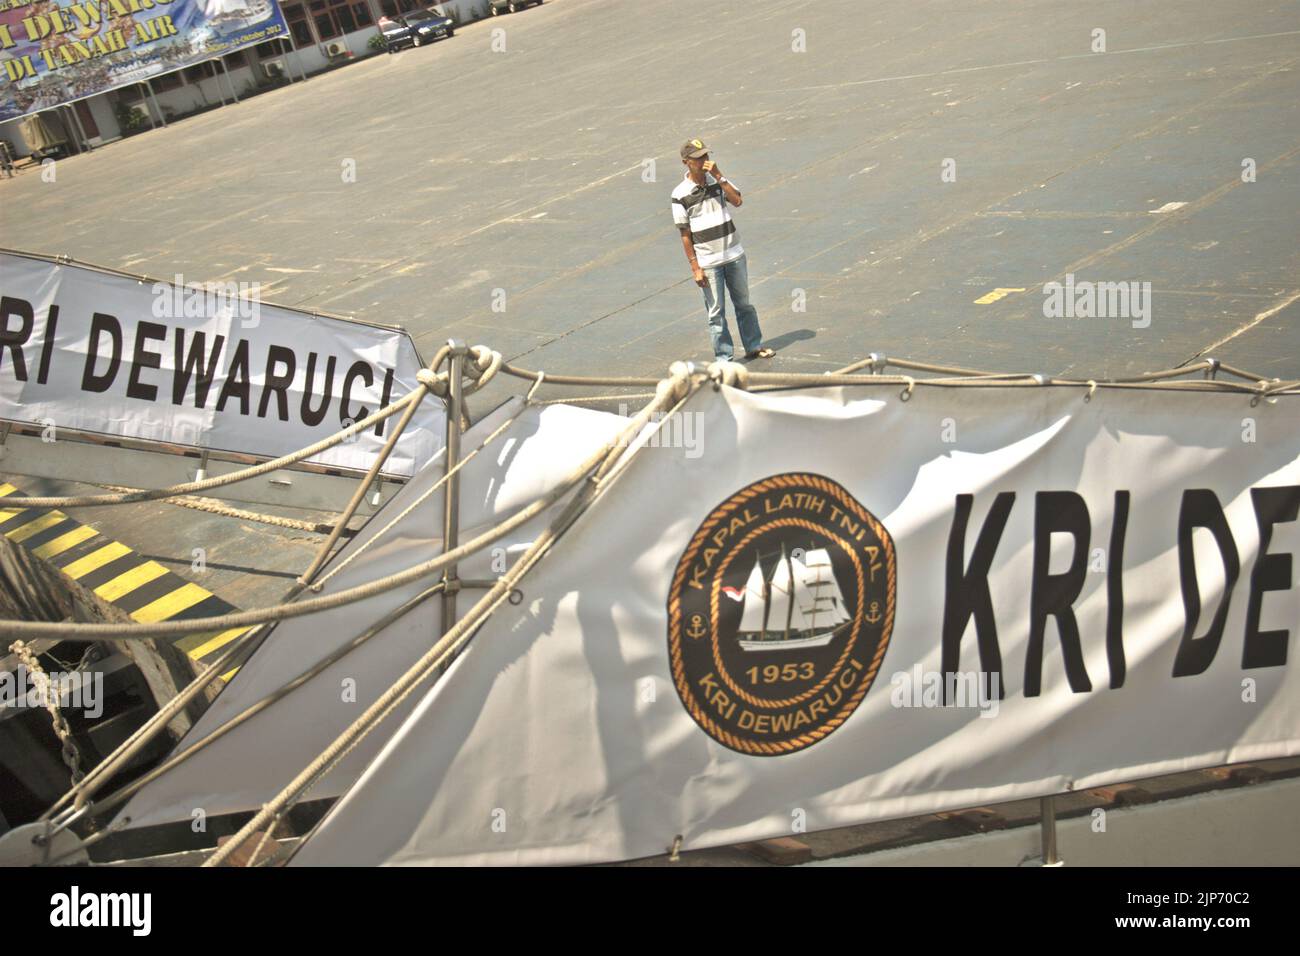 A visitor standing on harbour platform, in a foreground of the ladders of KRI Dewaruci (Dewa Ruci), an Indonesian tall ship, as the barquentine type schooner is opened for public visitors at Kolinlamil harbour (Navy harbour) in Tanjung Priok, North Jakarta, Jakarta, Indonesia. Stock Photo